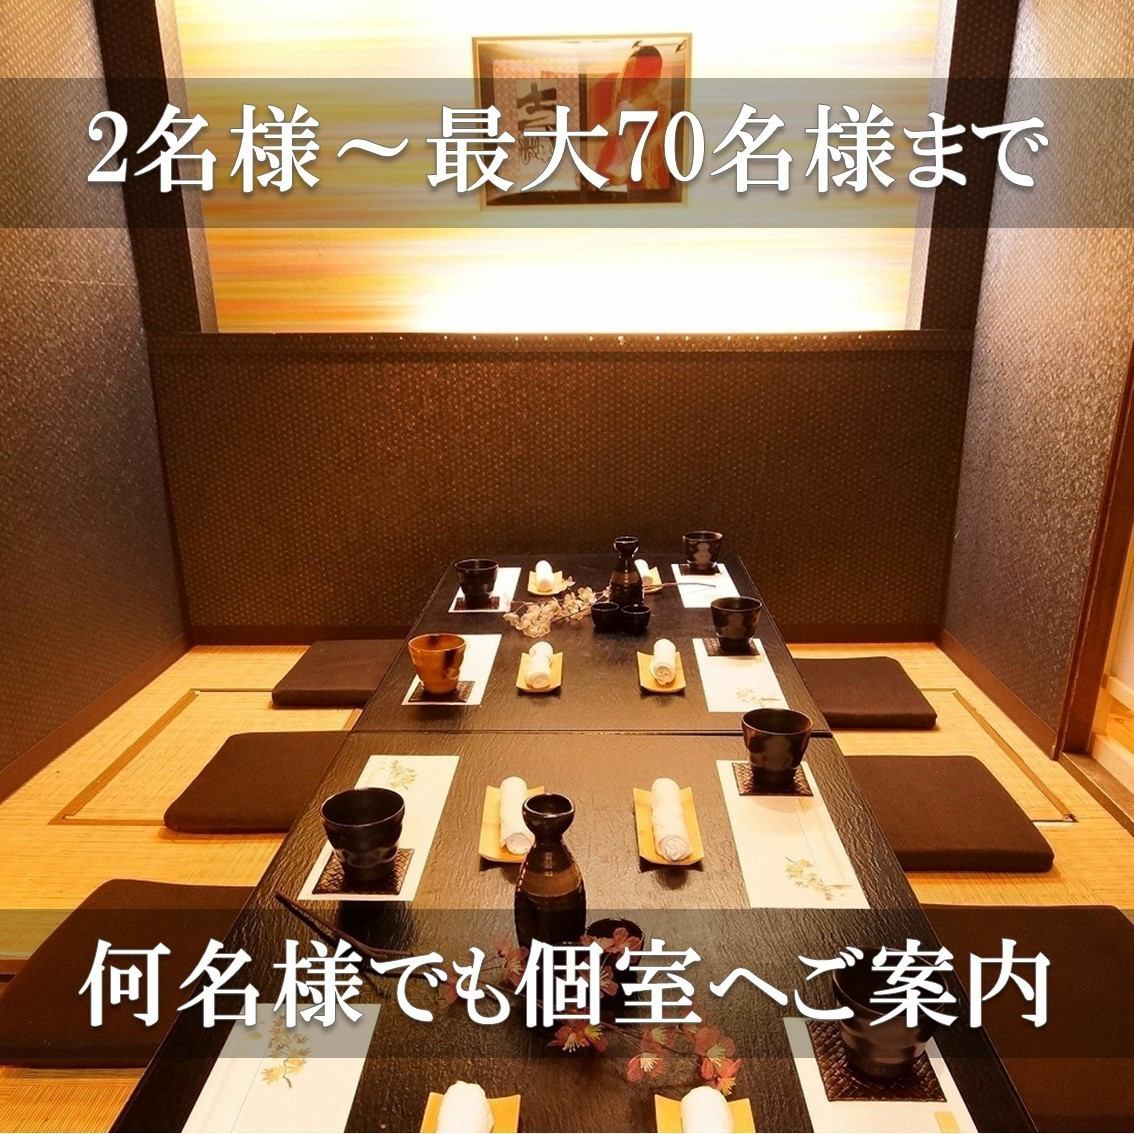 [Completely private room available] 2/4/6/8~70 people.Private room seats available according to the number of people